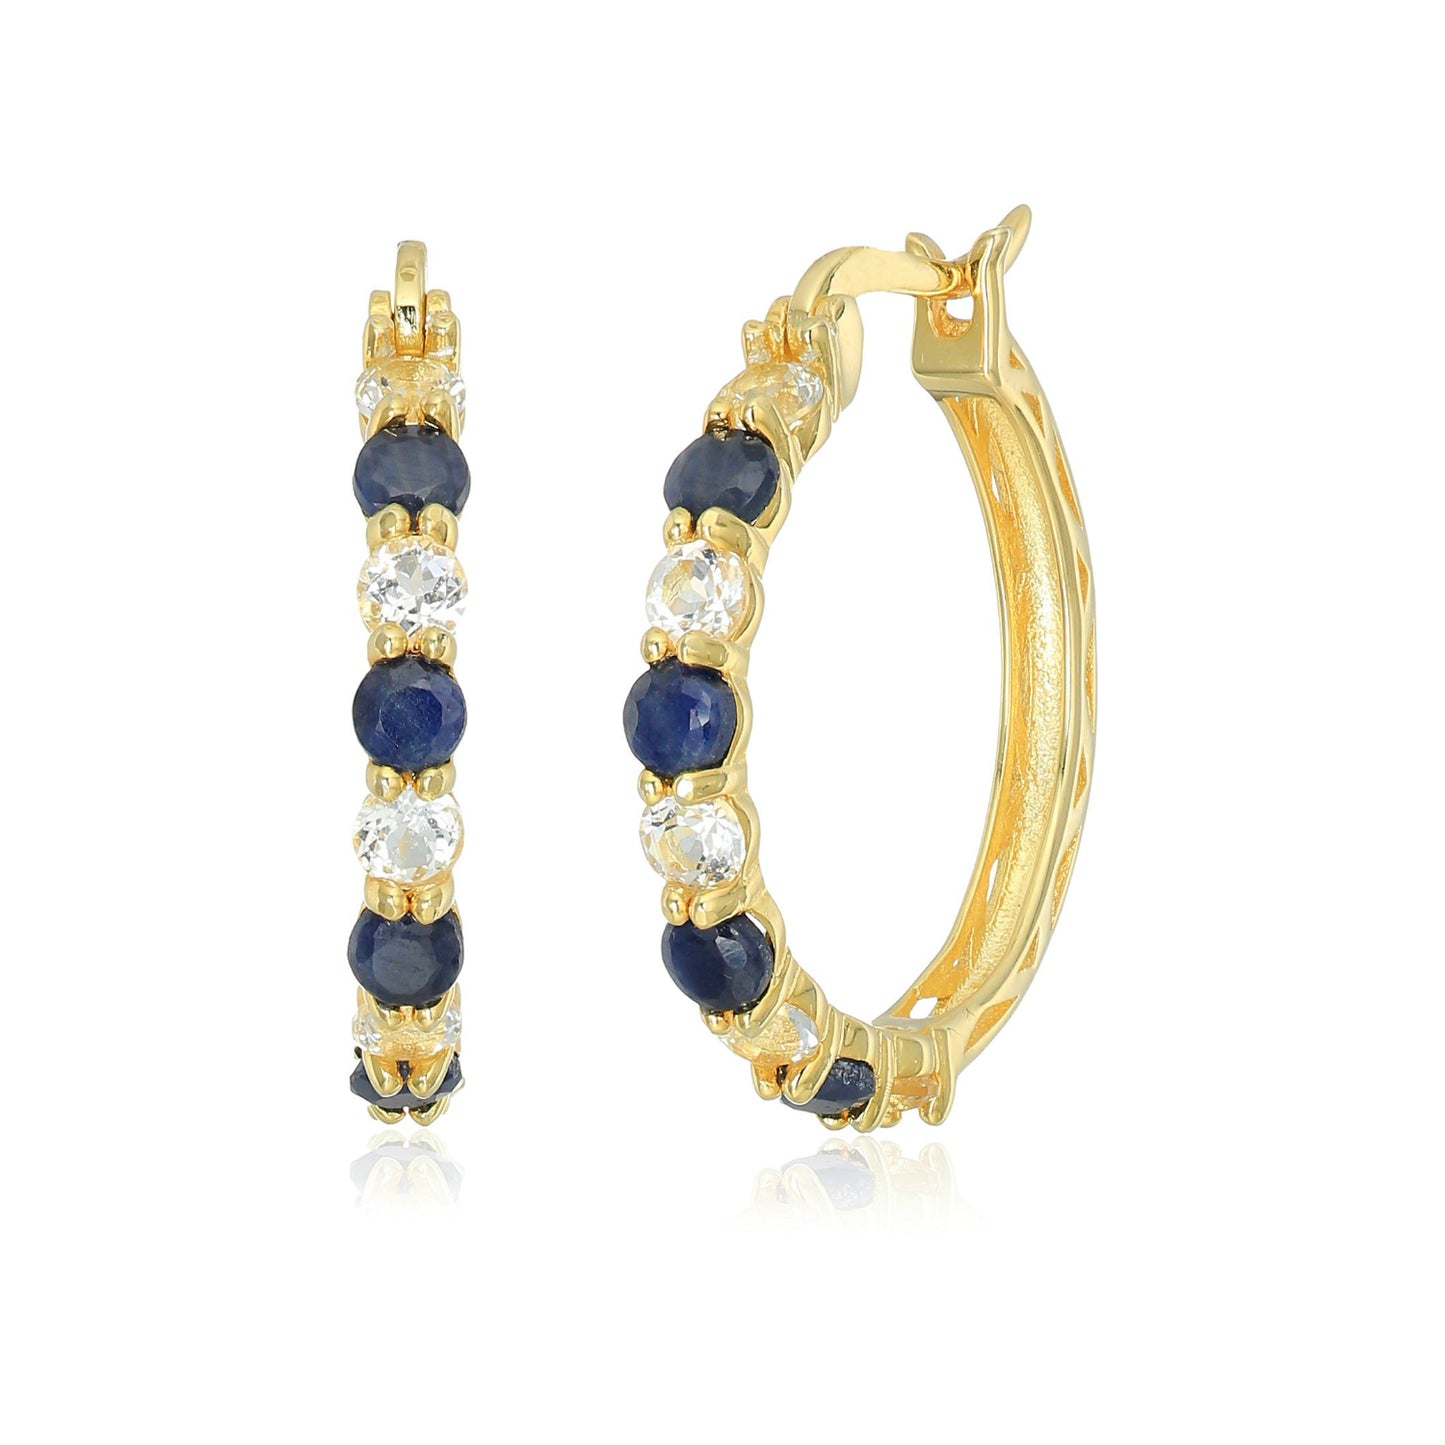 Pinctore Yellow Gold-Plated Silver 2 cttw Blue Sapphire and White Topaz Hoop Earrings, 1" - pinctore